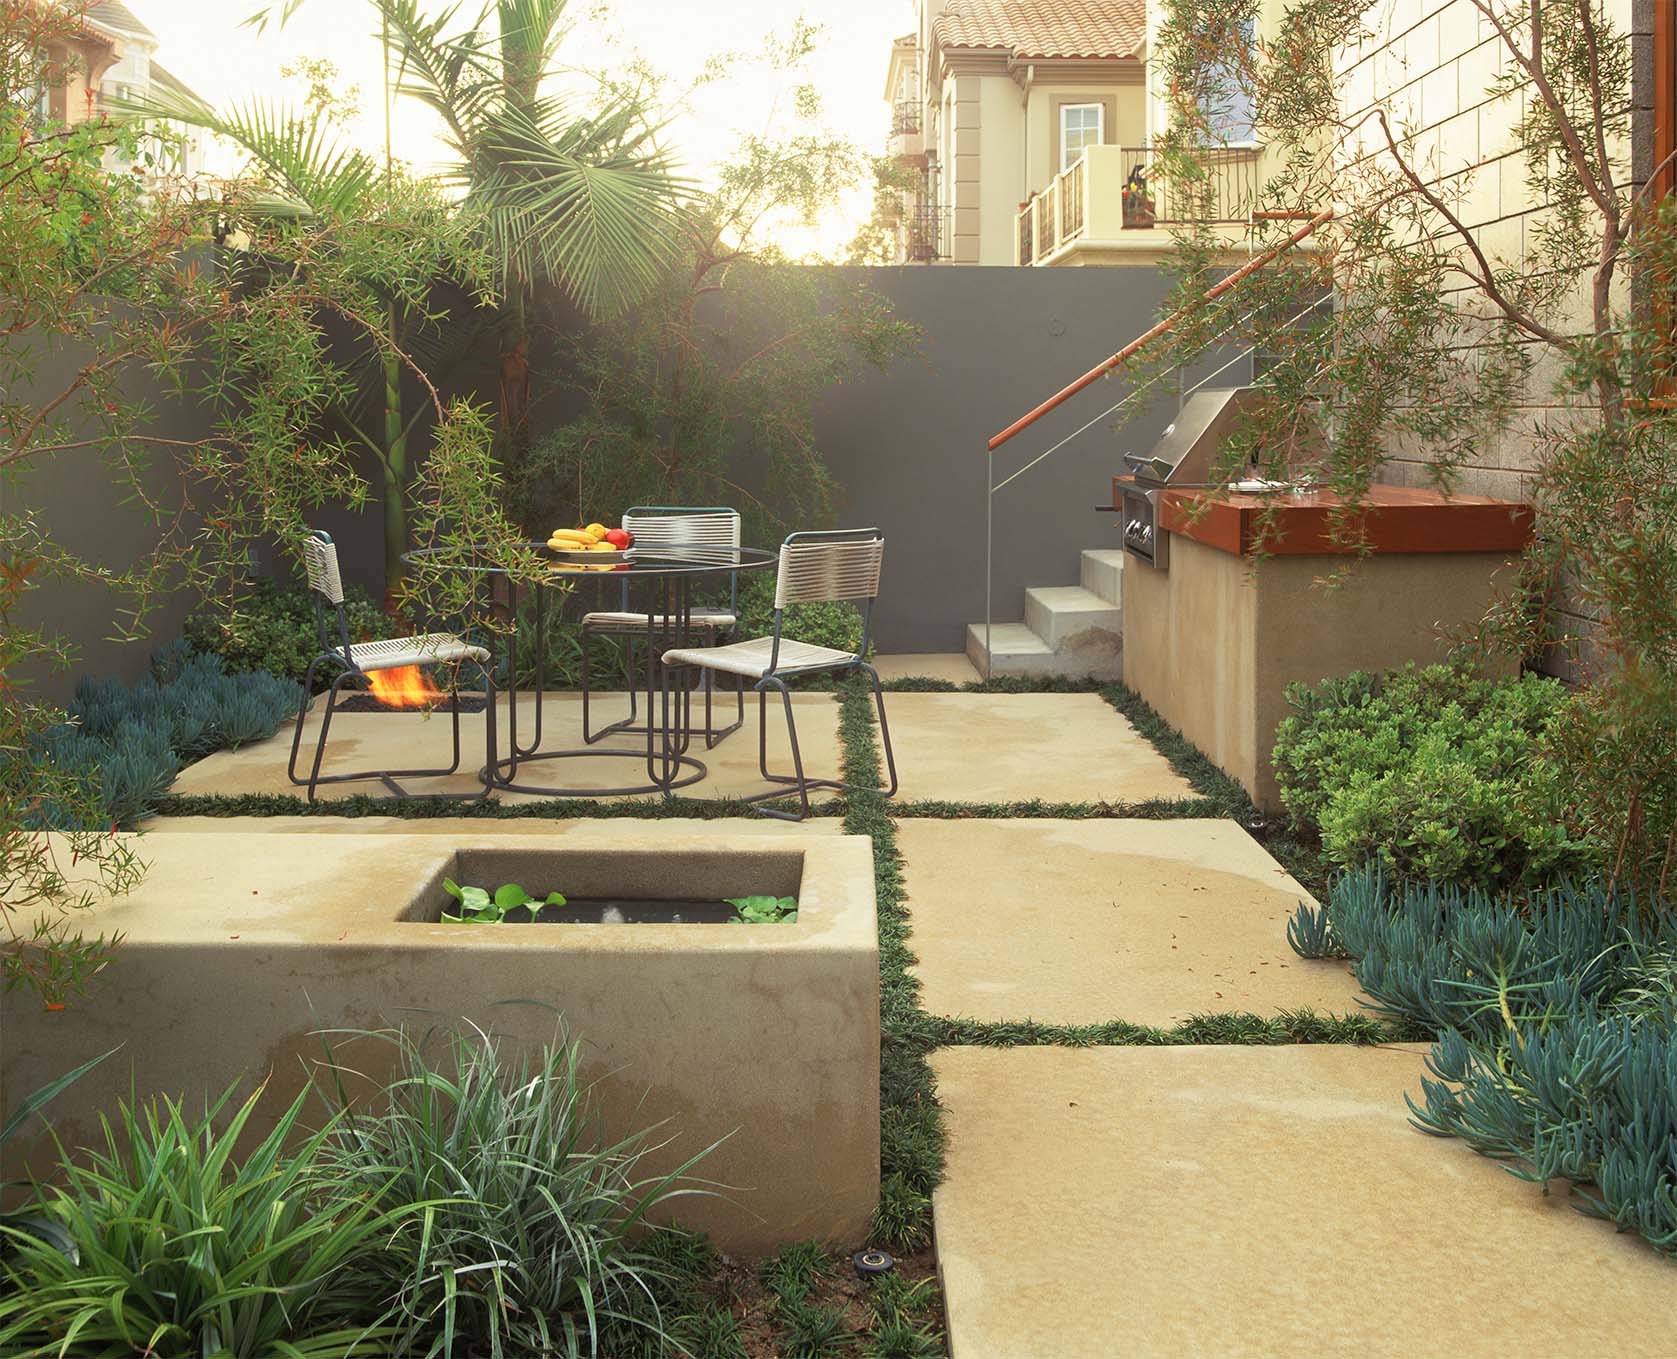 Small-space garden: Concrete pavers, a fountain with a miniature water garden, and a built-in barbecue anchor the space. The grill’s countertop ties in architectural detail.